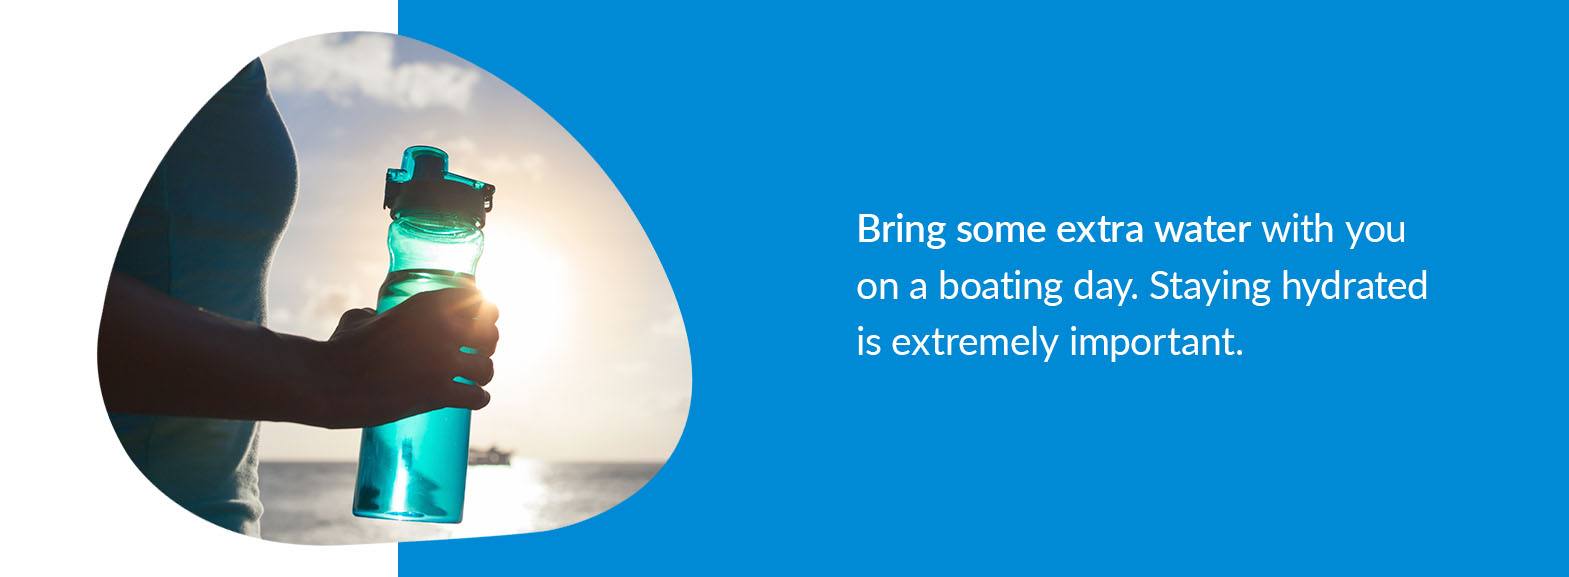 Bring some extra water with you on a boating day. Staying hydrated is extremely important.